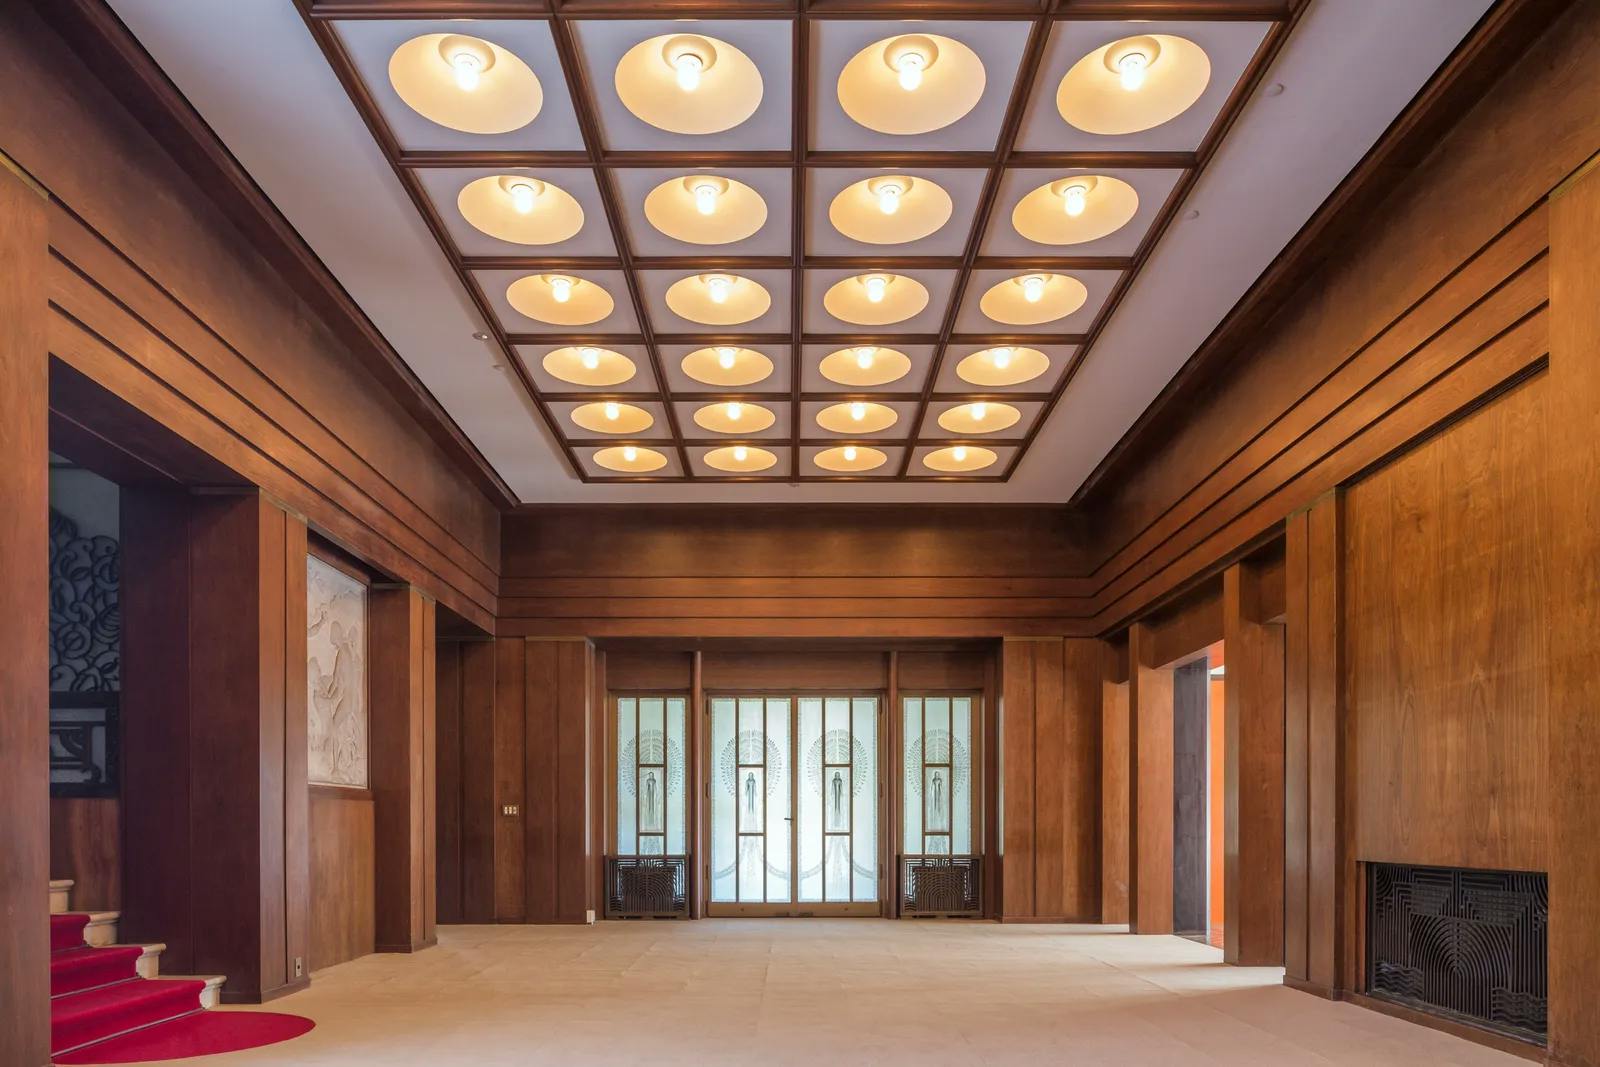 The entrance hall of the the former Asaka Palace in Tokyo